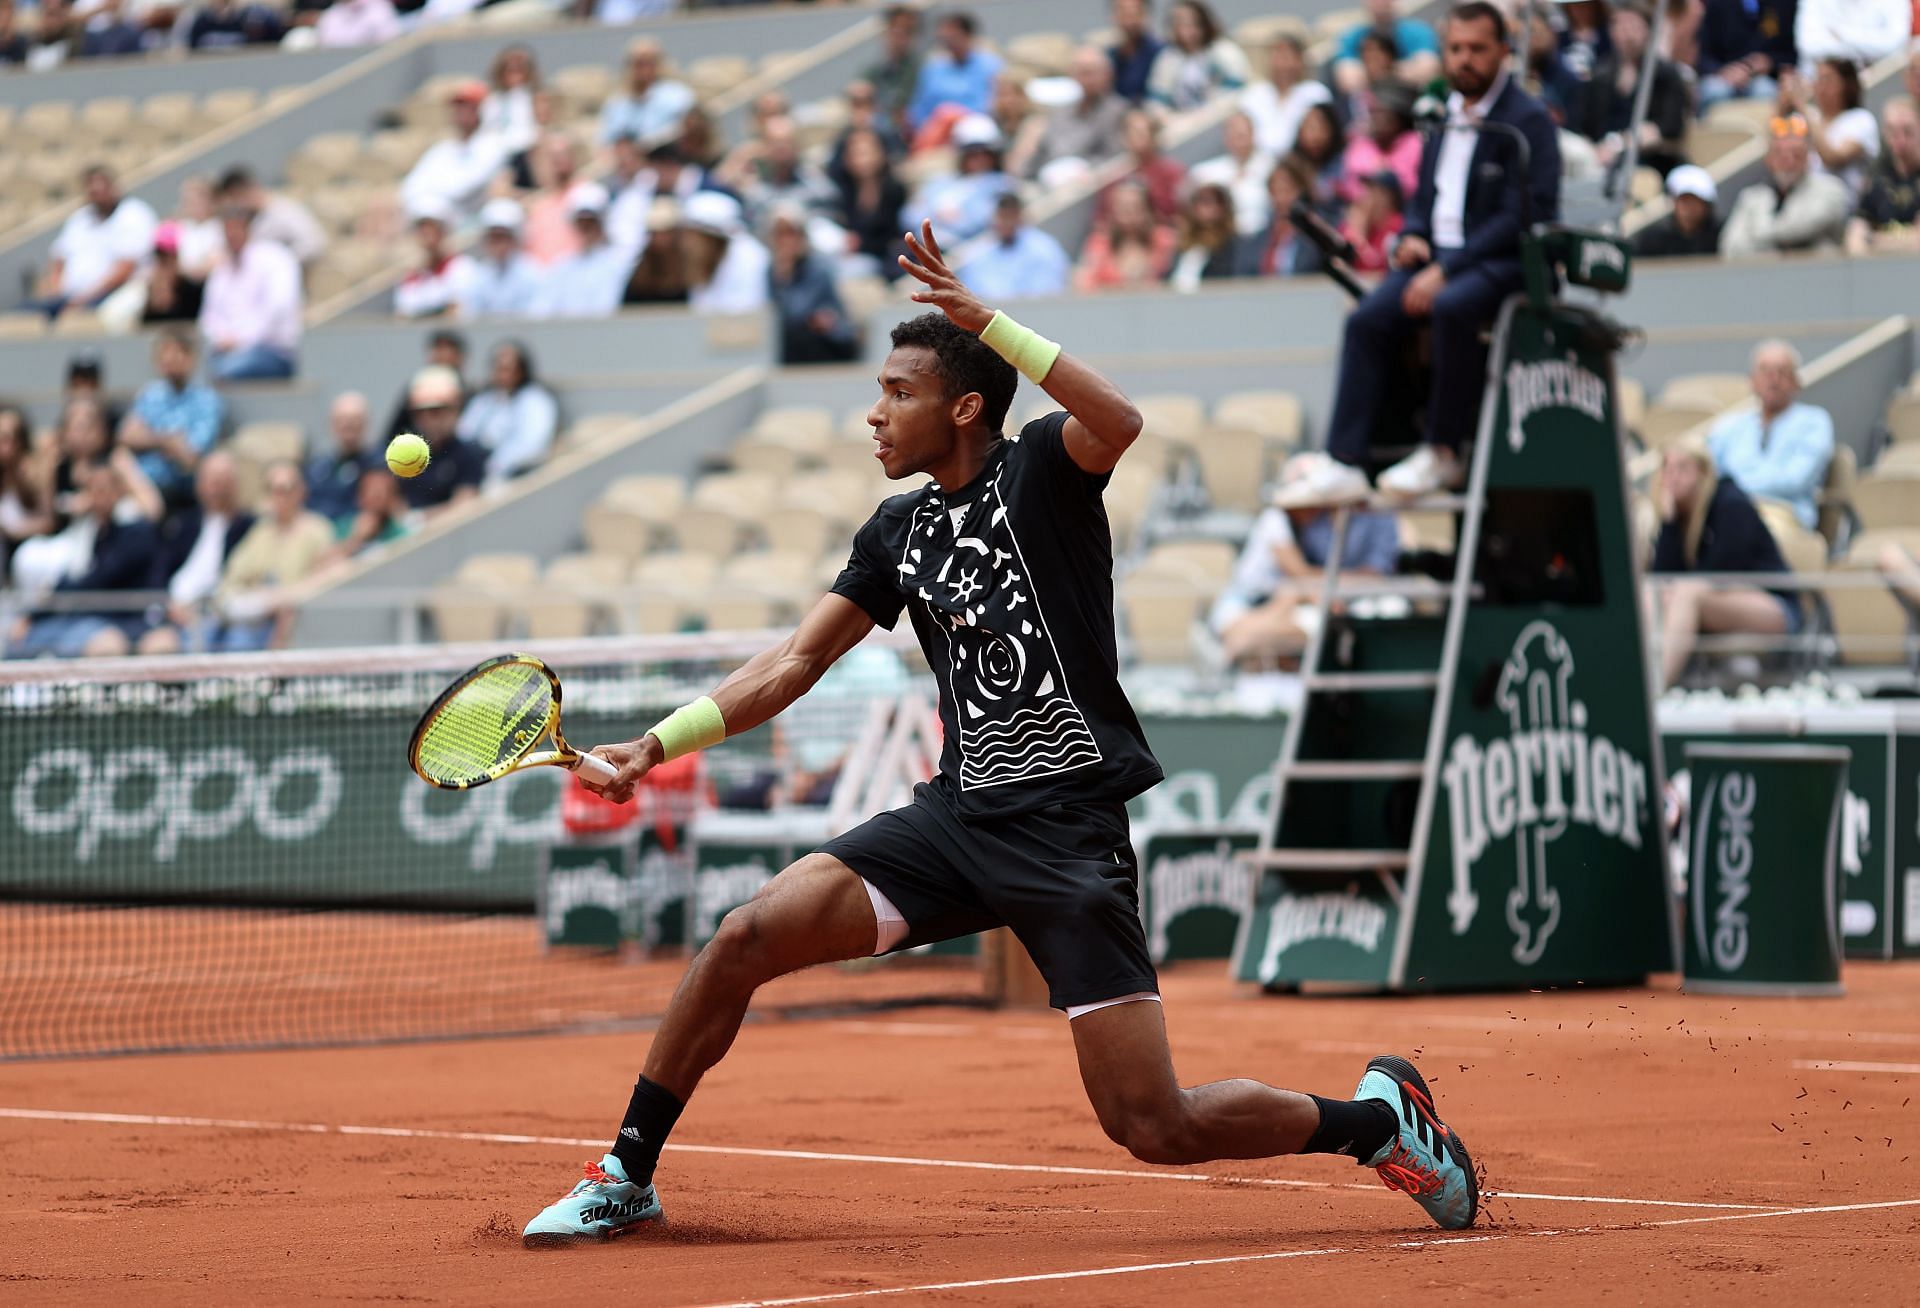 Auger-Aliassime at 2022 French open